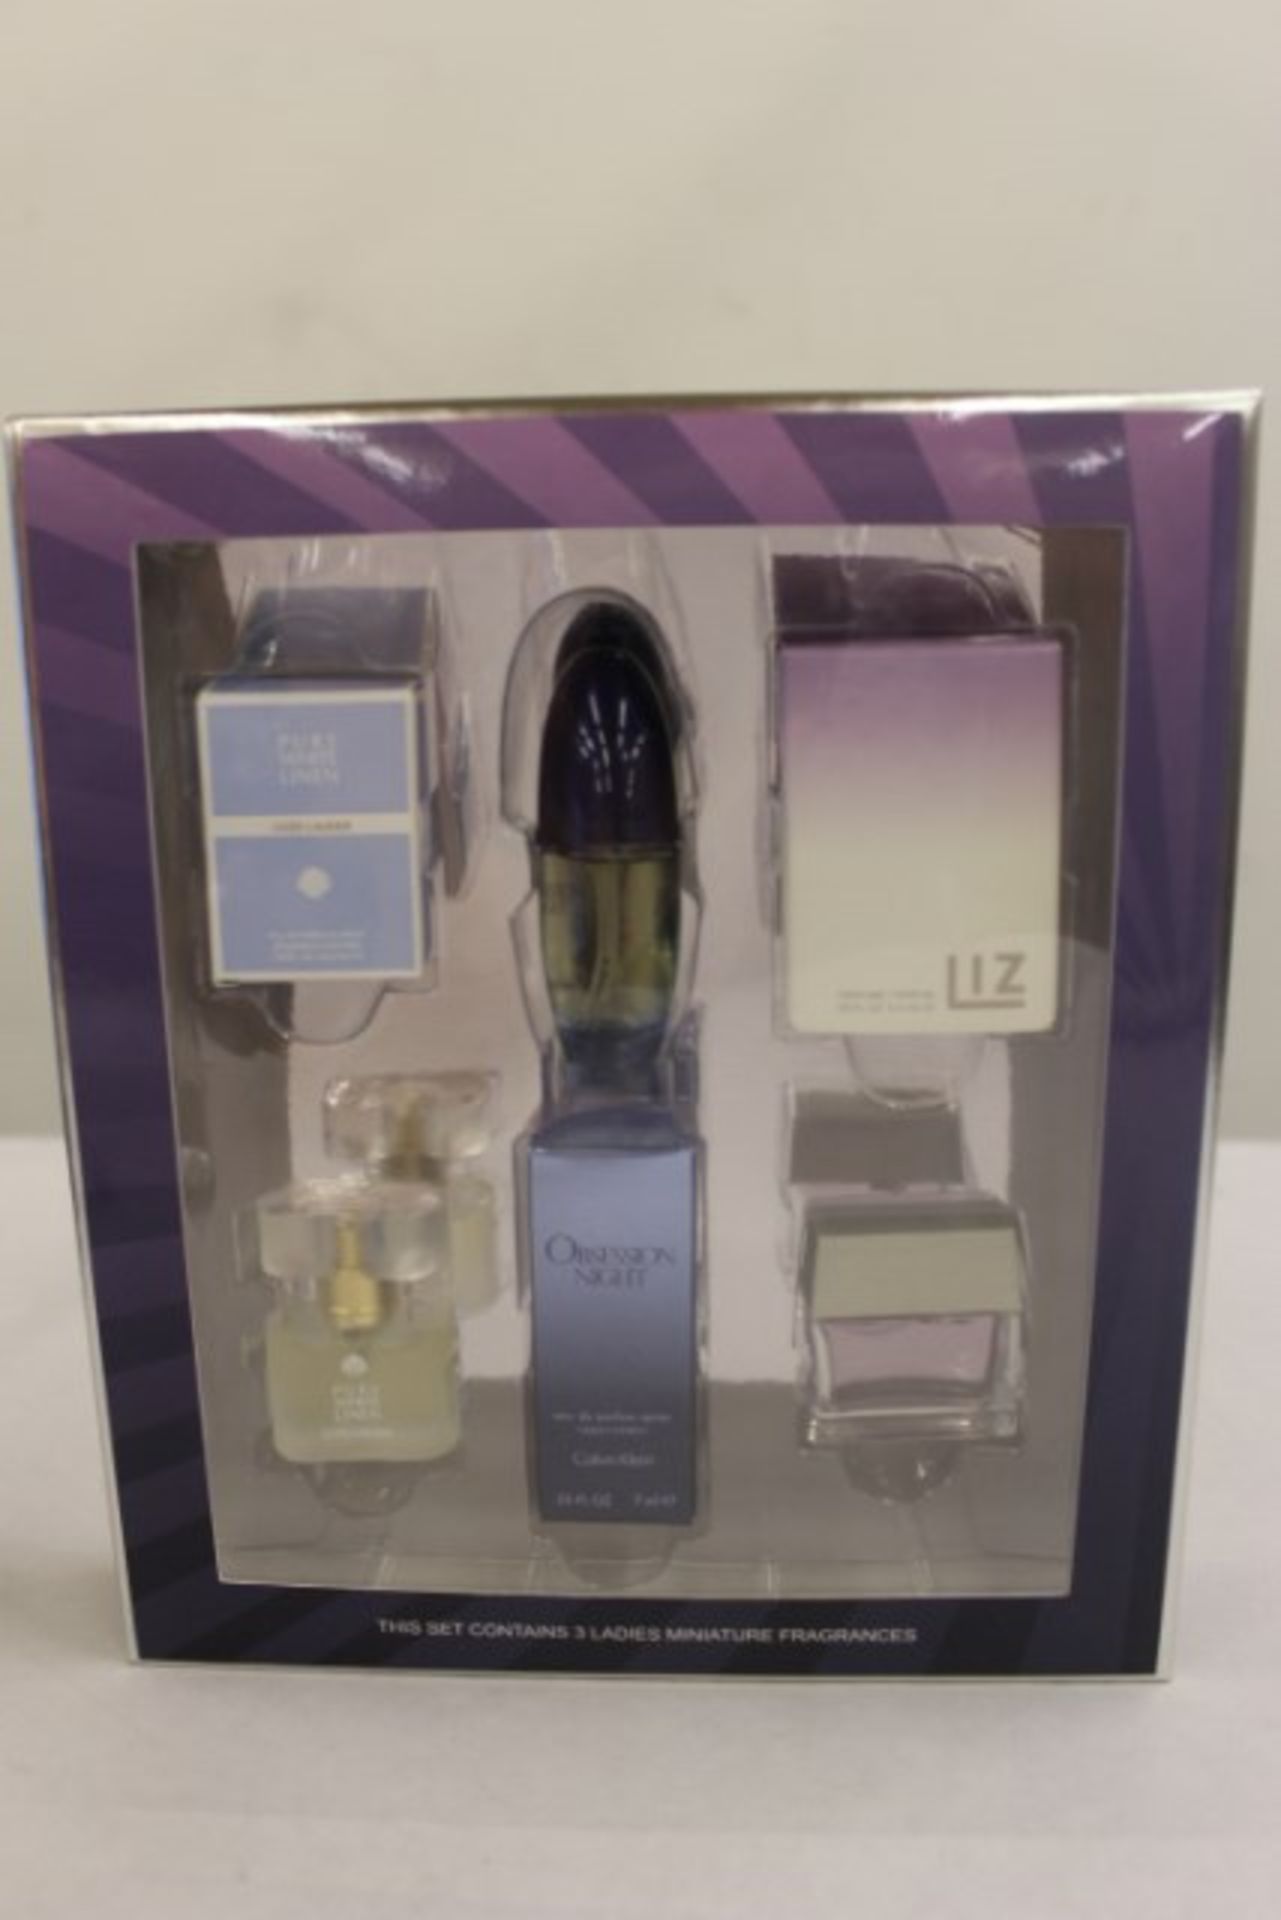 V Ladies Fragrance Collection including Pure White Linen, Obsession Night and Liz Claiborne - Image 3 of 3